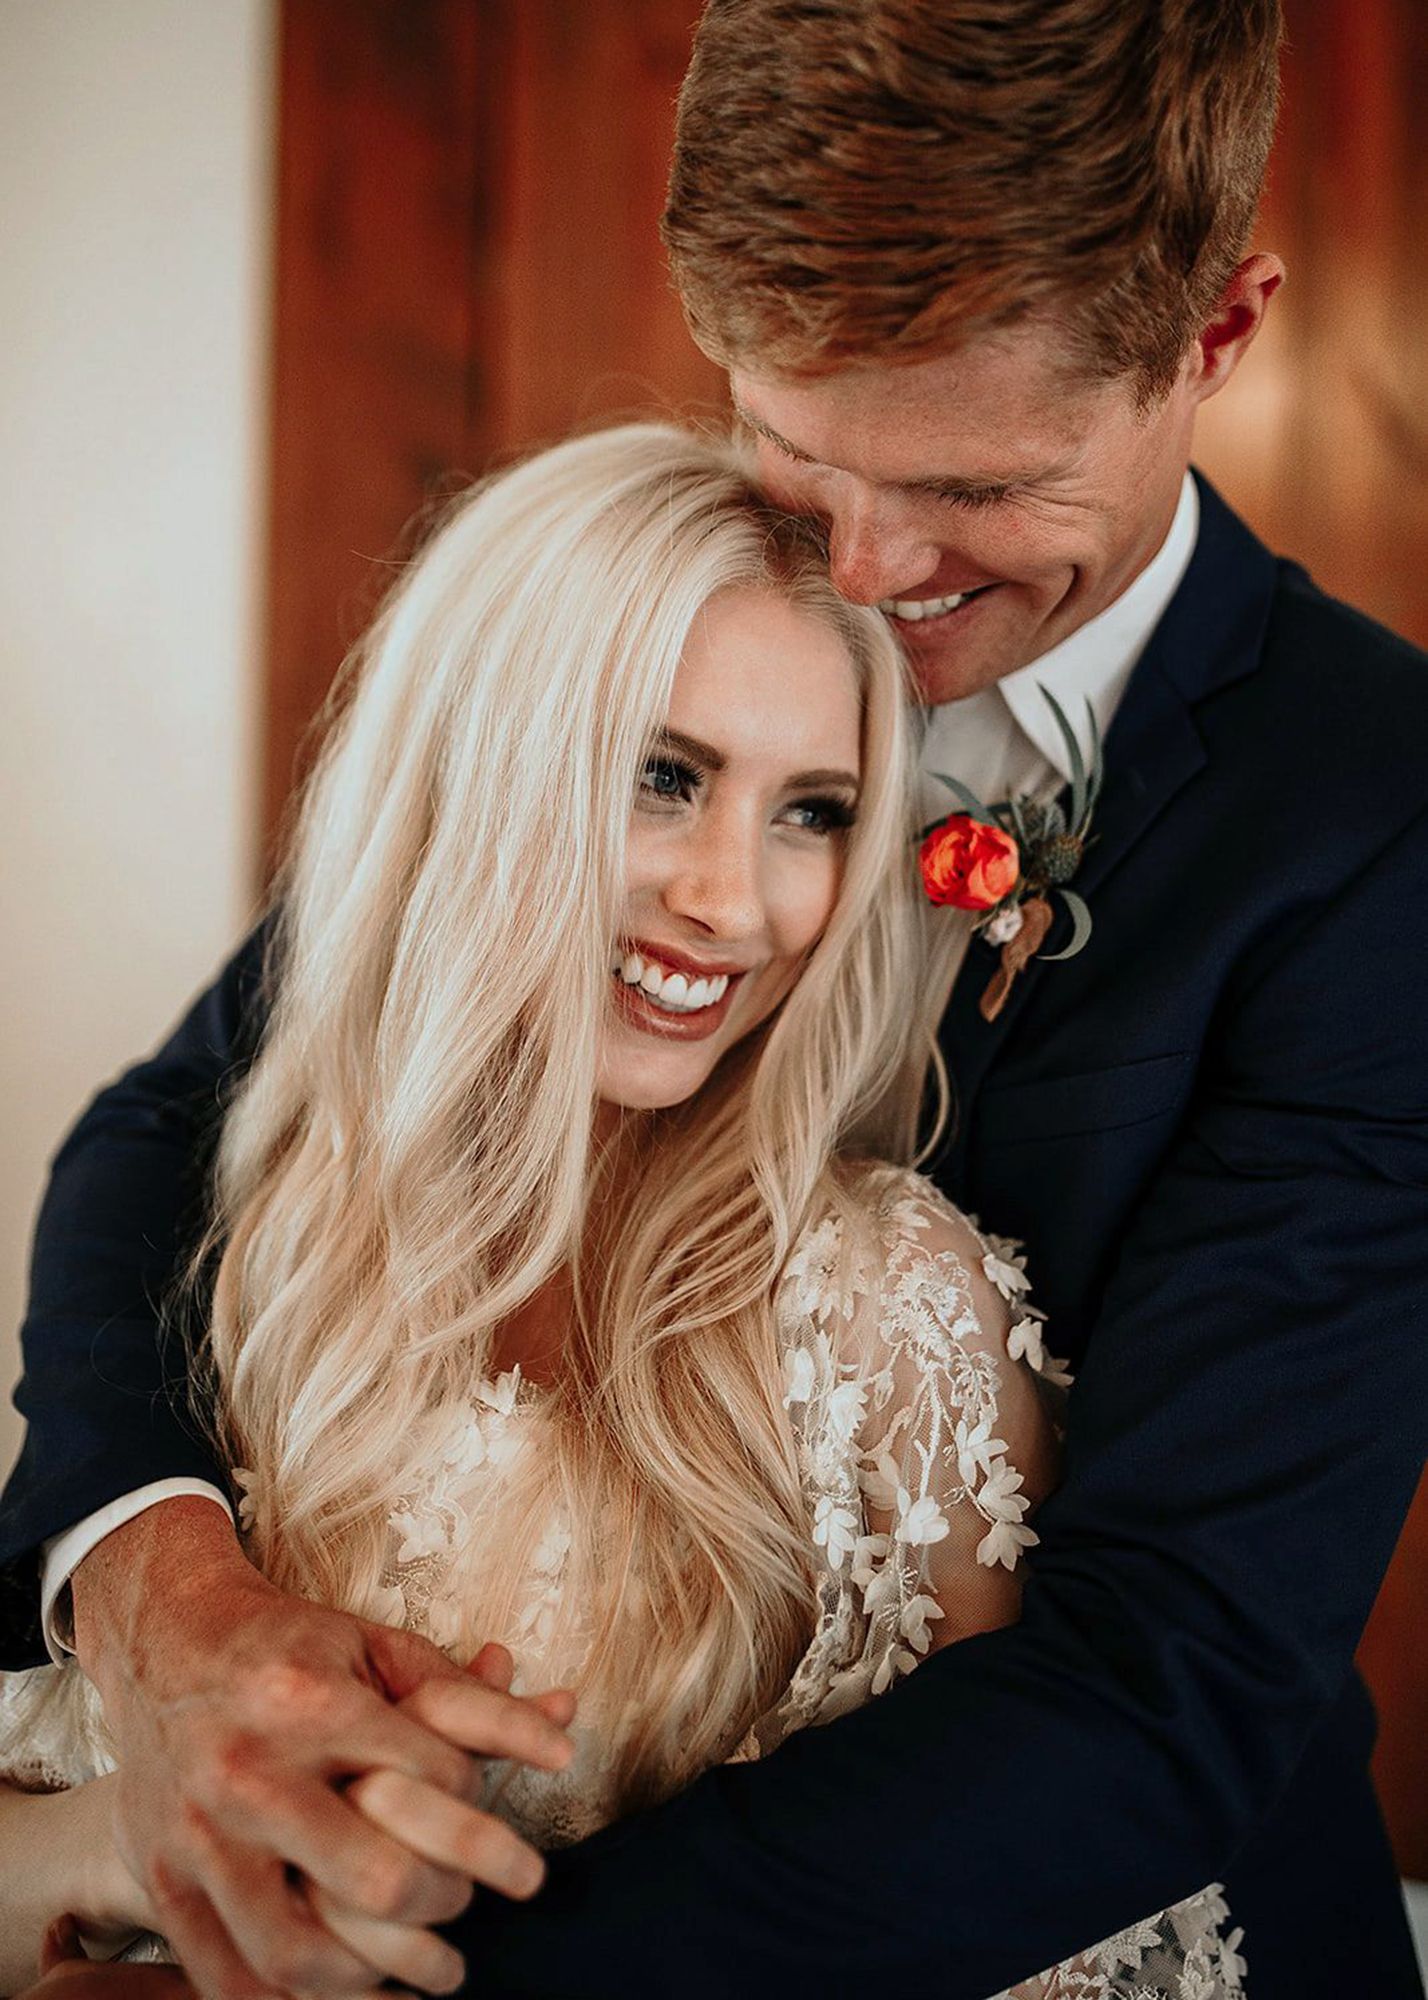 photo of a groom wearing a black tuxedo holding his blonde bride